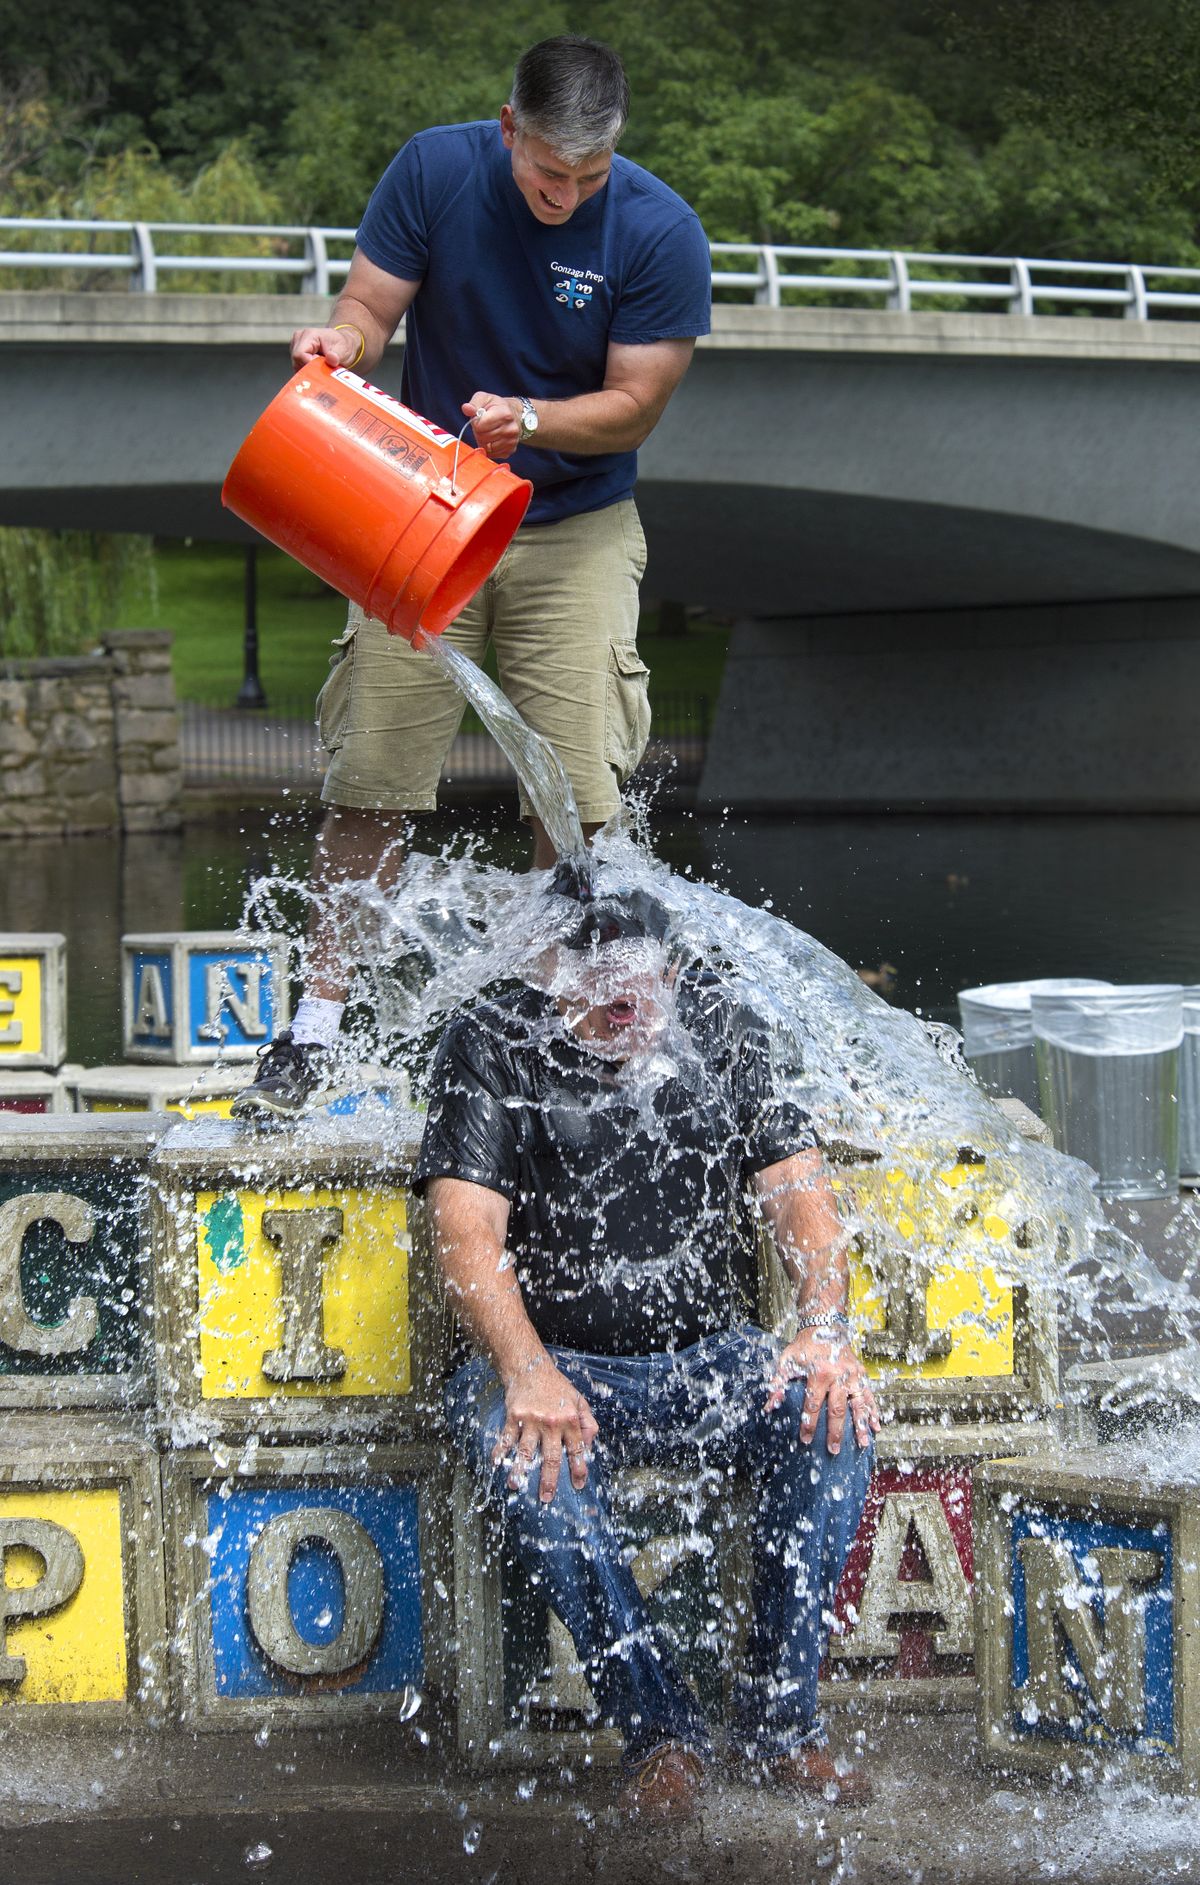 State Sen. Michael Baumgartner pours a bucket of ice and river water over Doug Clark on Friday in Riverfront Park. Baumgartner challenged Clark to take the ALS Ice Bucket Challenge. (Dan Pelle)